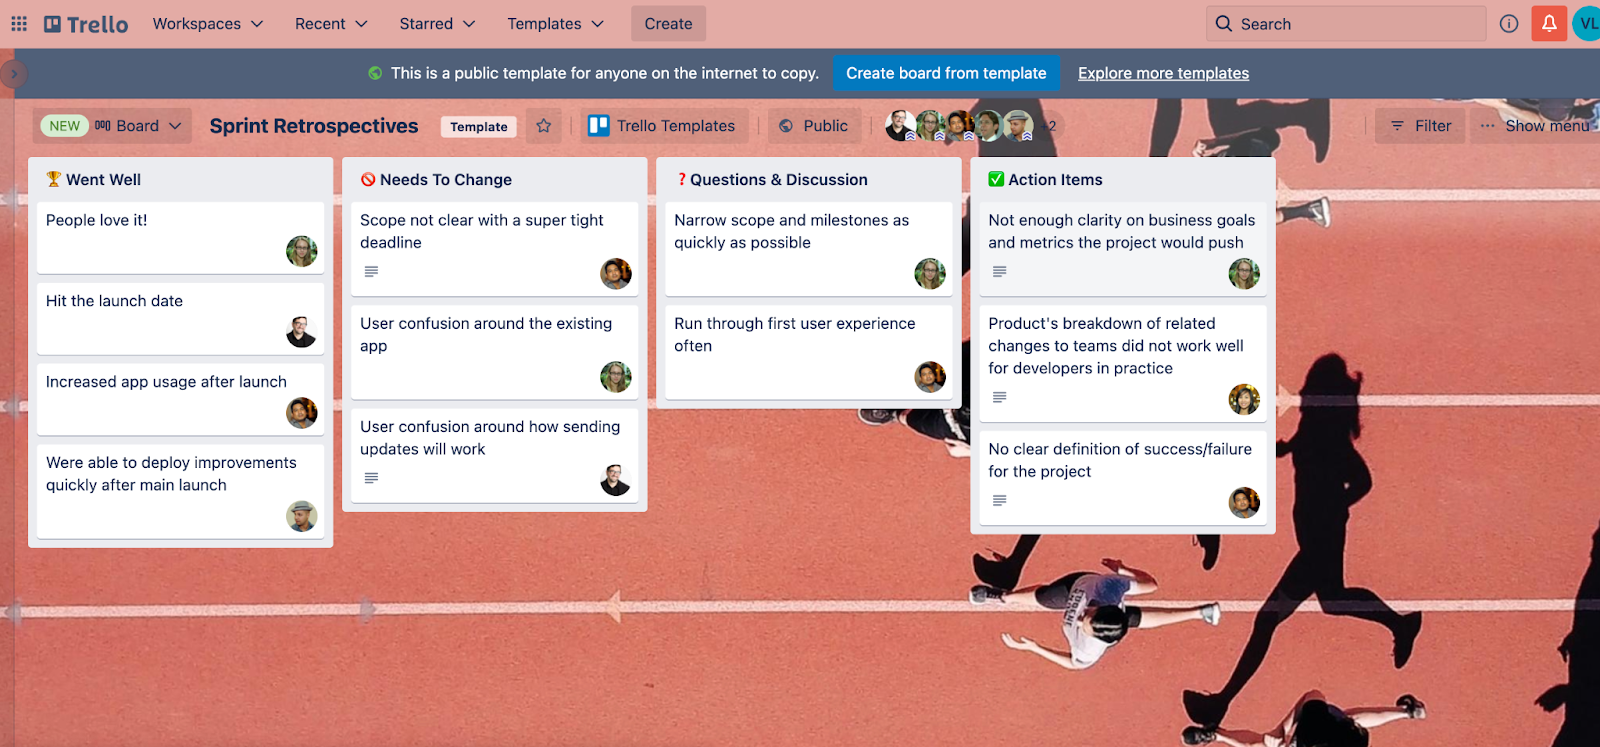 Photo of Trello’s Sprint Retrospectives template, which allows teams to reflect on areas for improvement, questions for discussion, and action items.